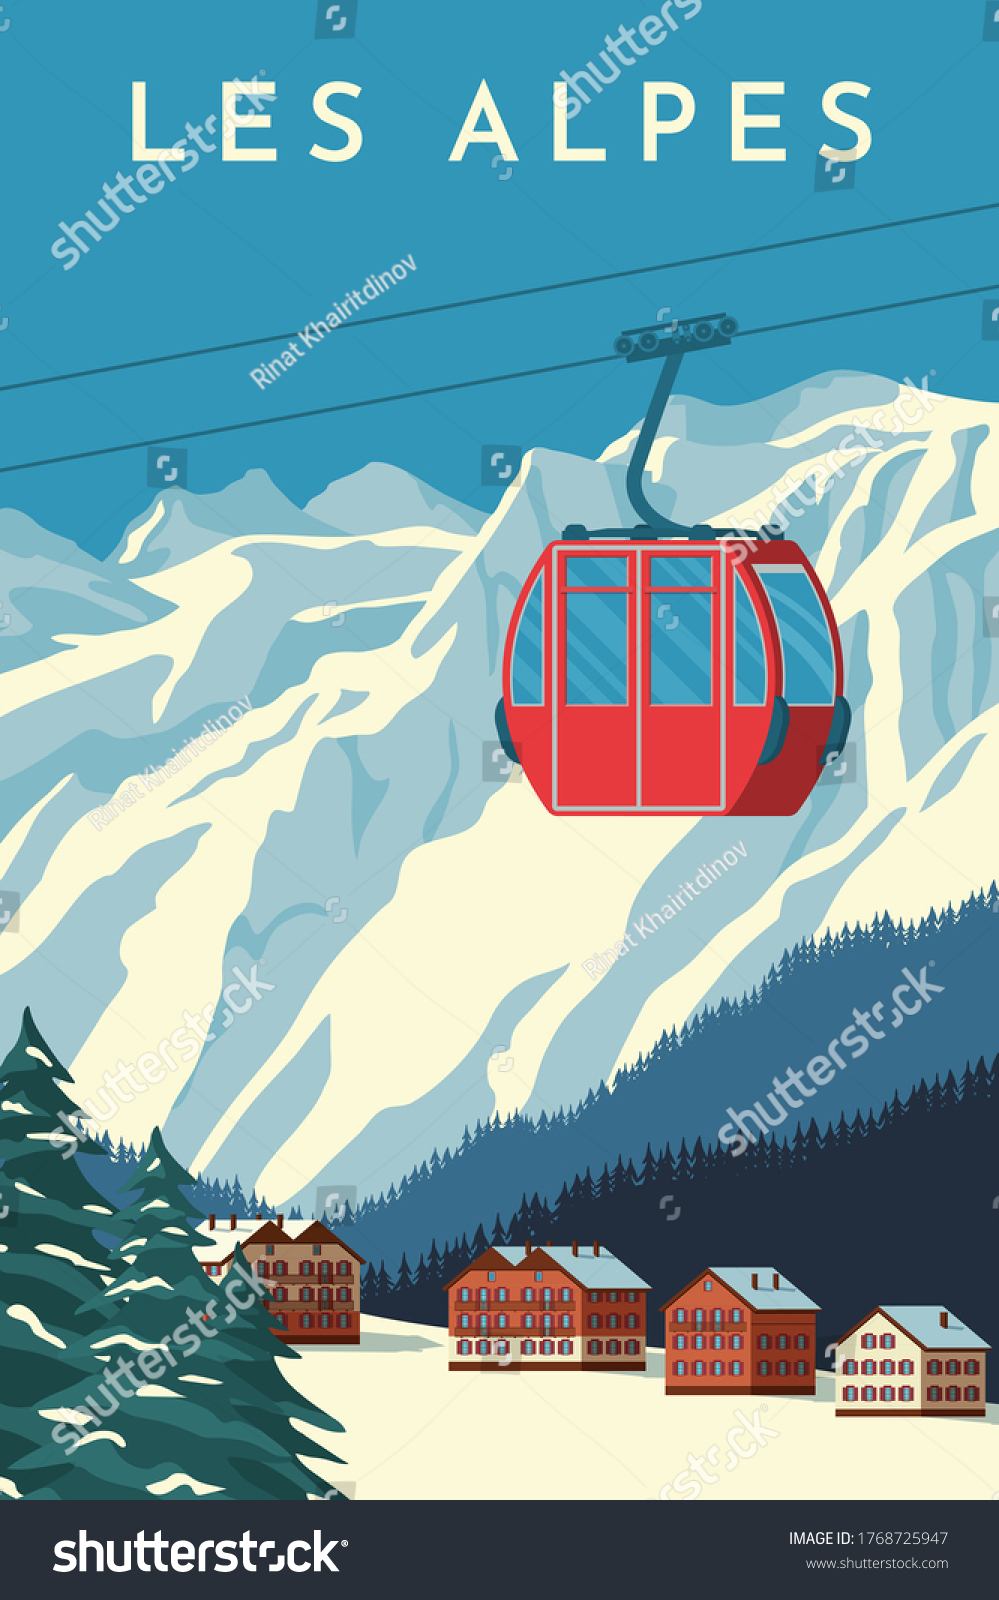 Ski resort with red gondola lift, mountain chalet, winter snowy landscape. Alps travel retro poster, vintage banner. Hand drawing flat vector illustration. #1768725947